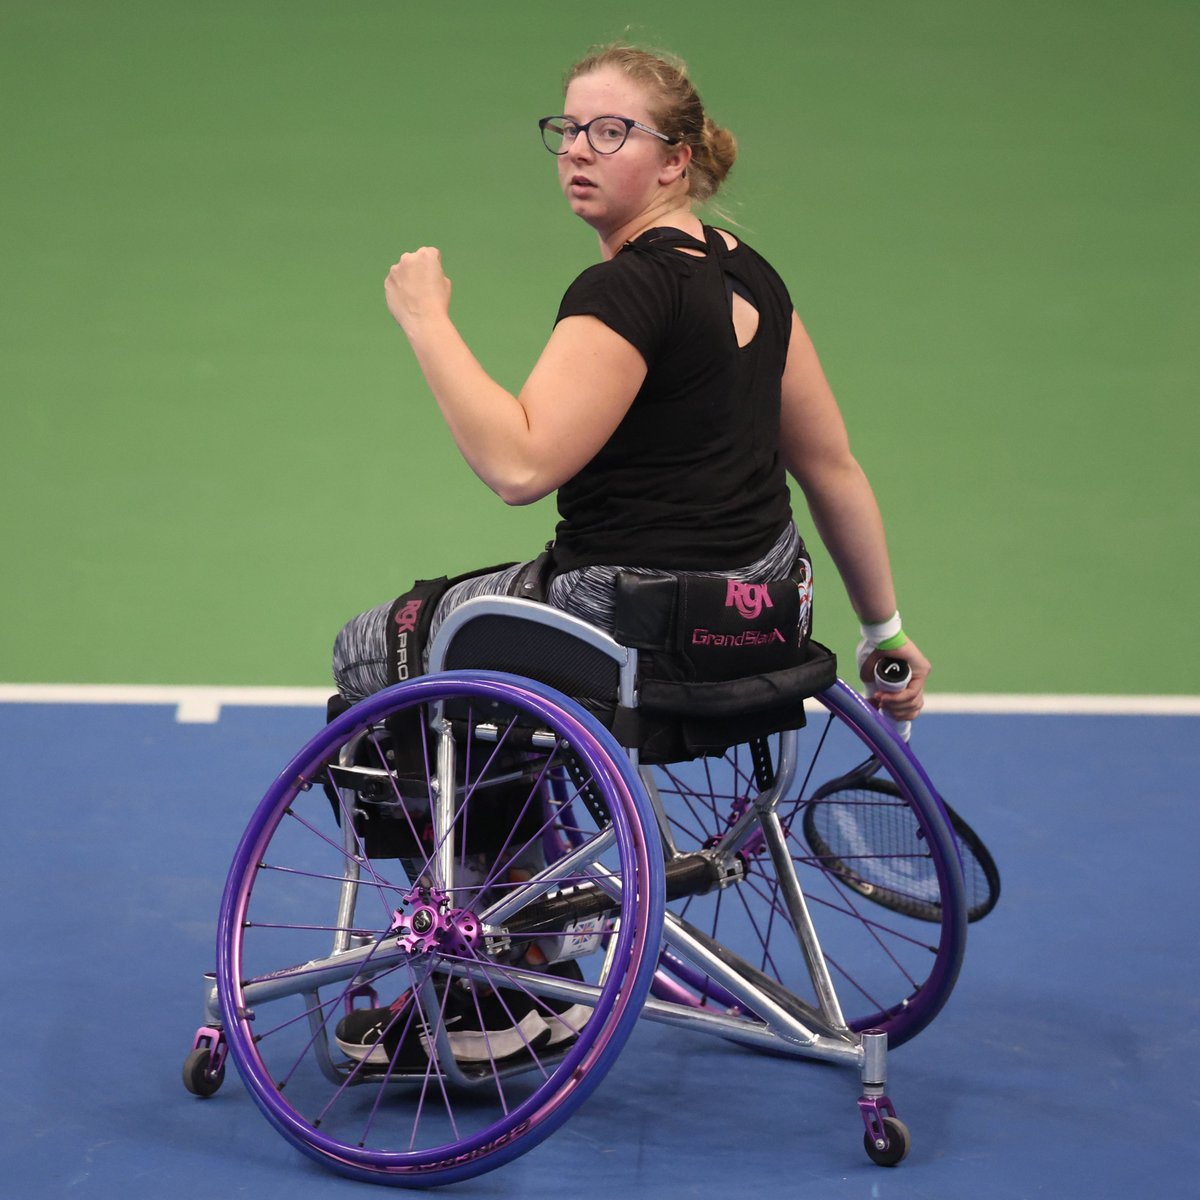 A BIG win for @lucy_shuker & @AbbieBreakwell over the fourth seeds...

Lucy & Abbie beat Ksenia Chasteau & Pauline Deroulede (FRA) 3-6, 6-2, (12-10) to reach tomorrow's women's doubles semis at the Kemal Sahin Cup in Turkey.

#BackTheBrits 🇬🇧 | #wheelchairtennis